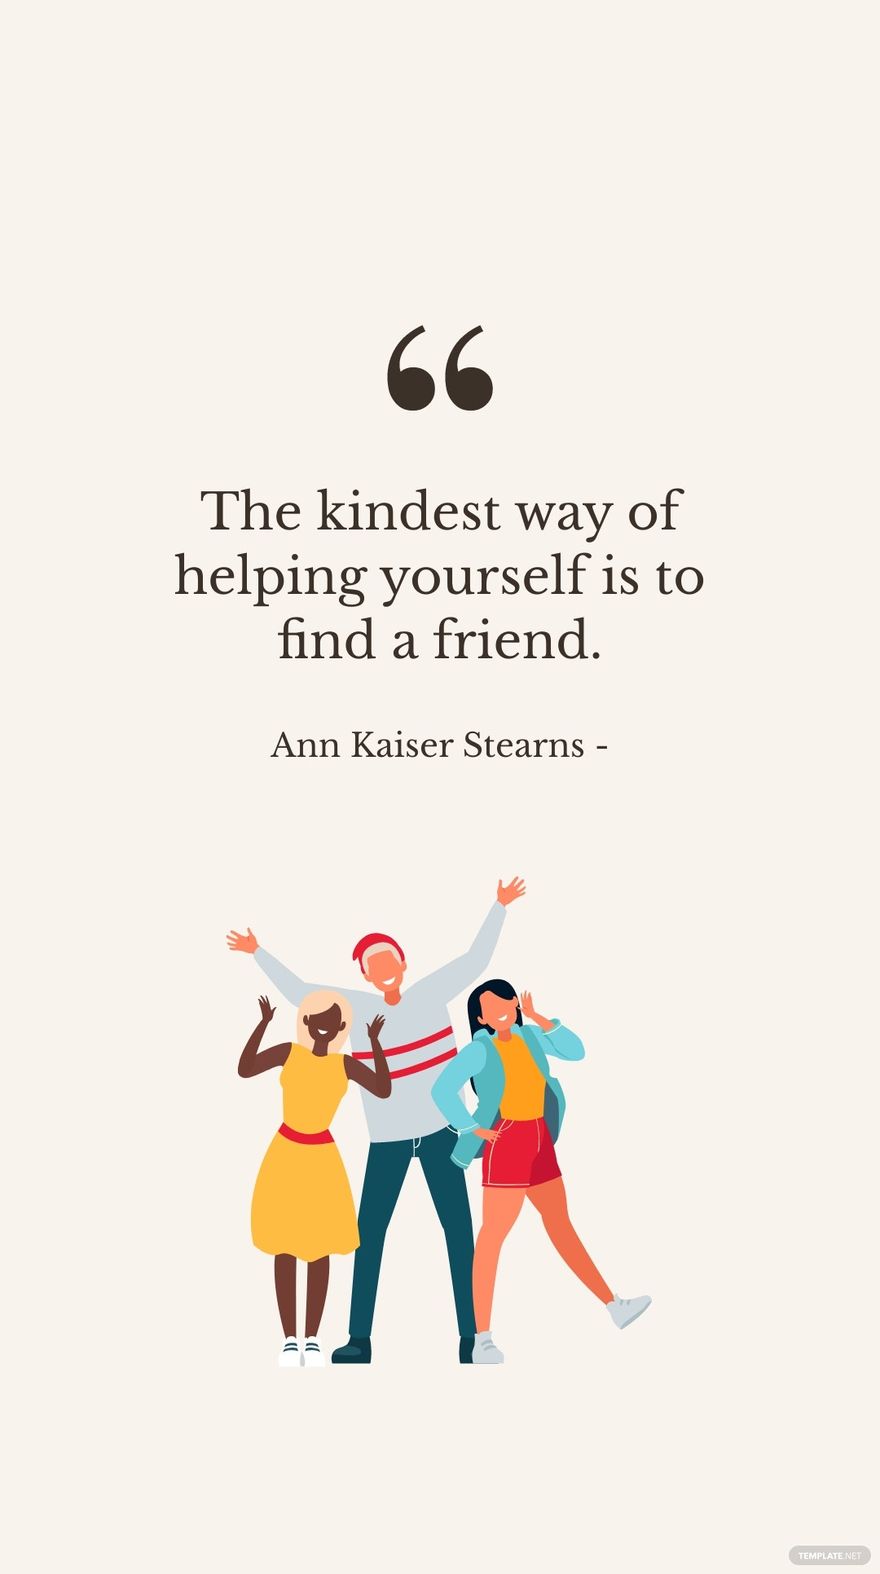 Free Ann Kaiser Stearns - The kindest way of helping yourself is to find a friend.